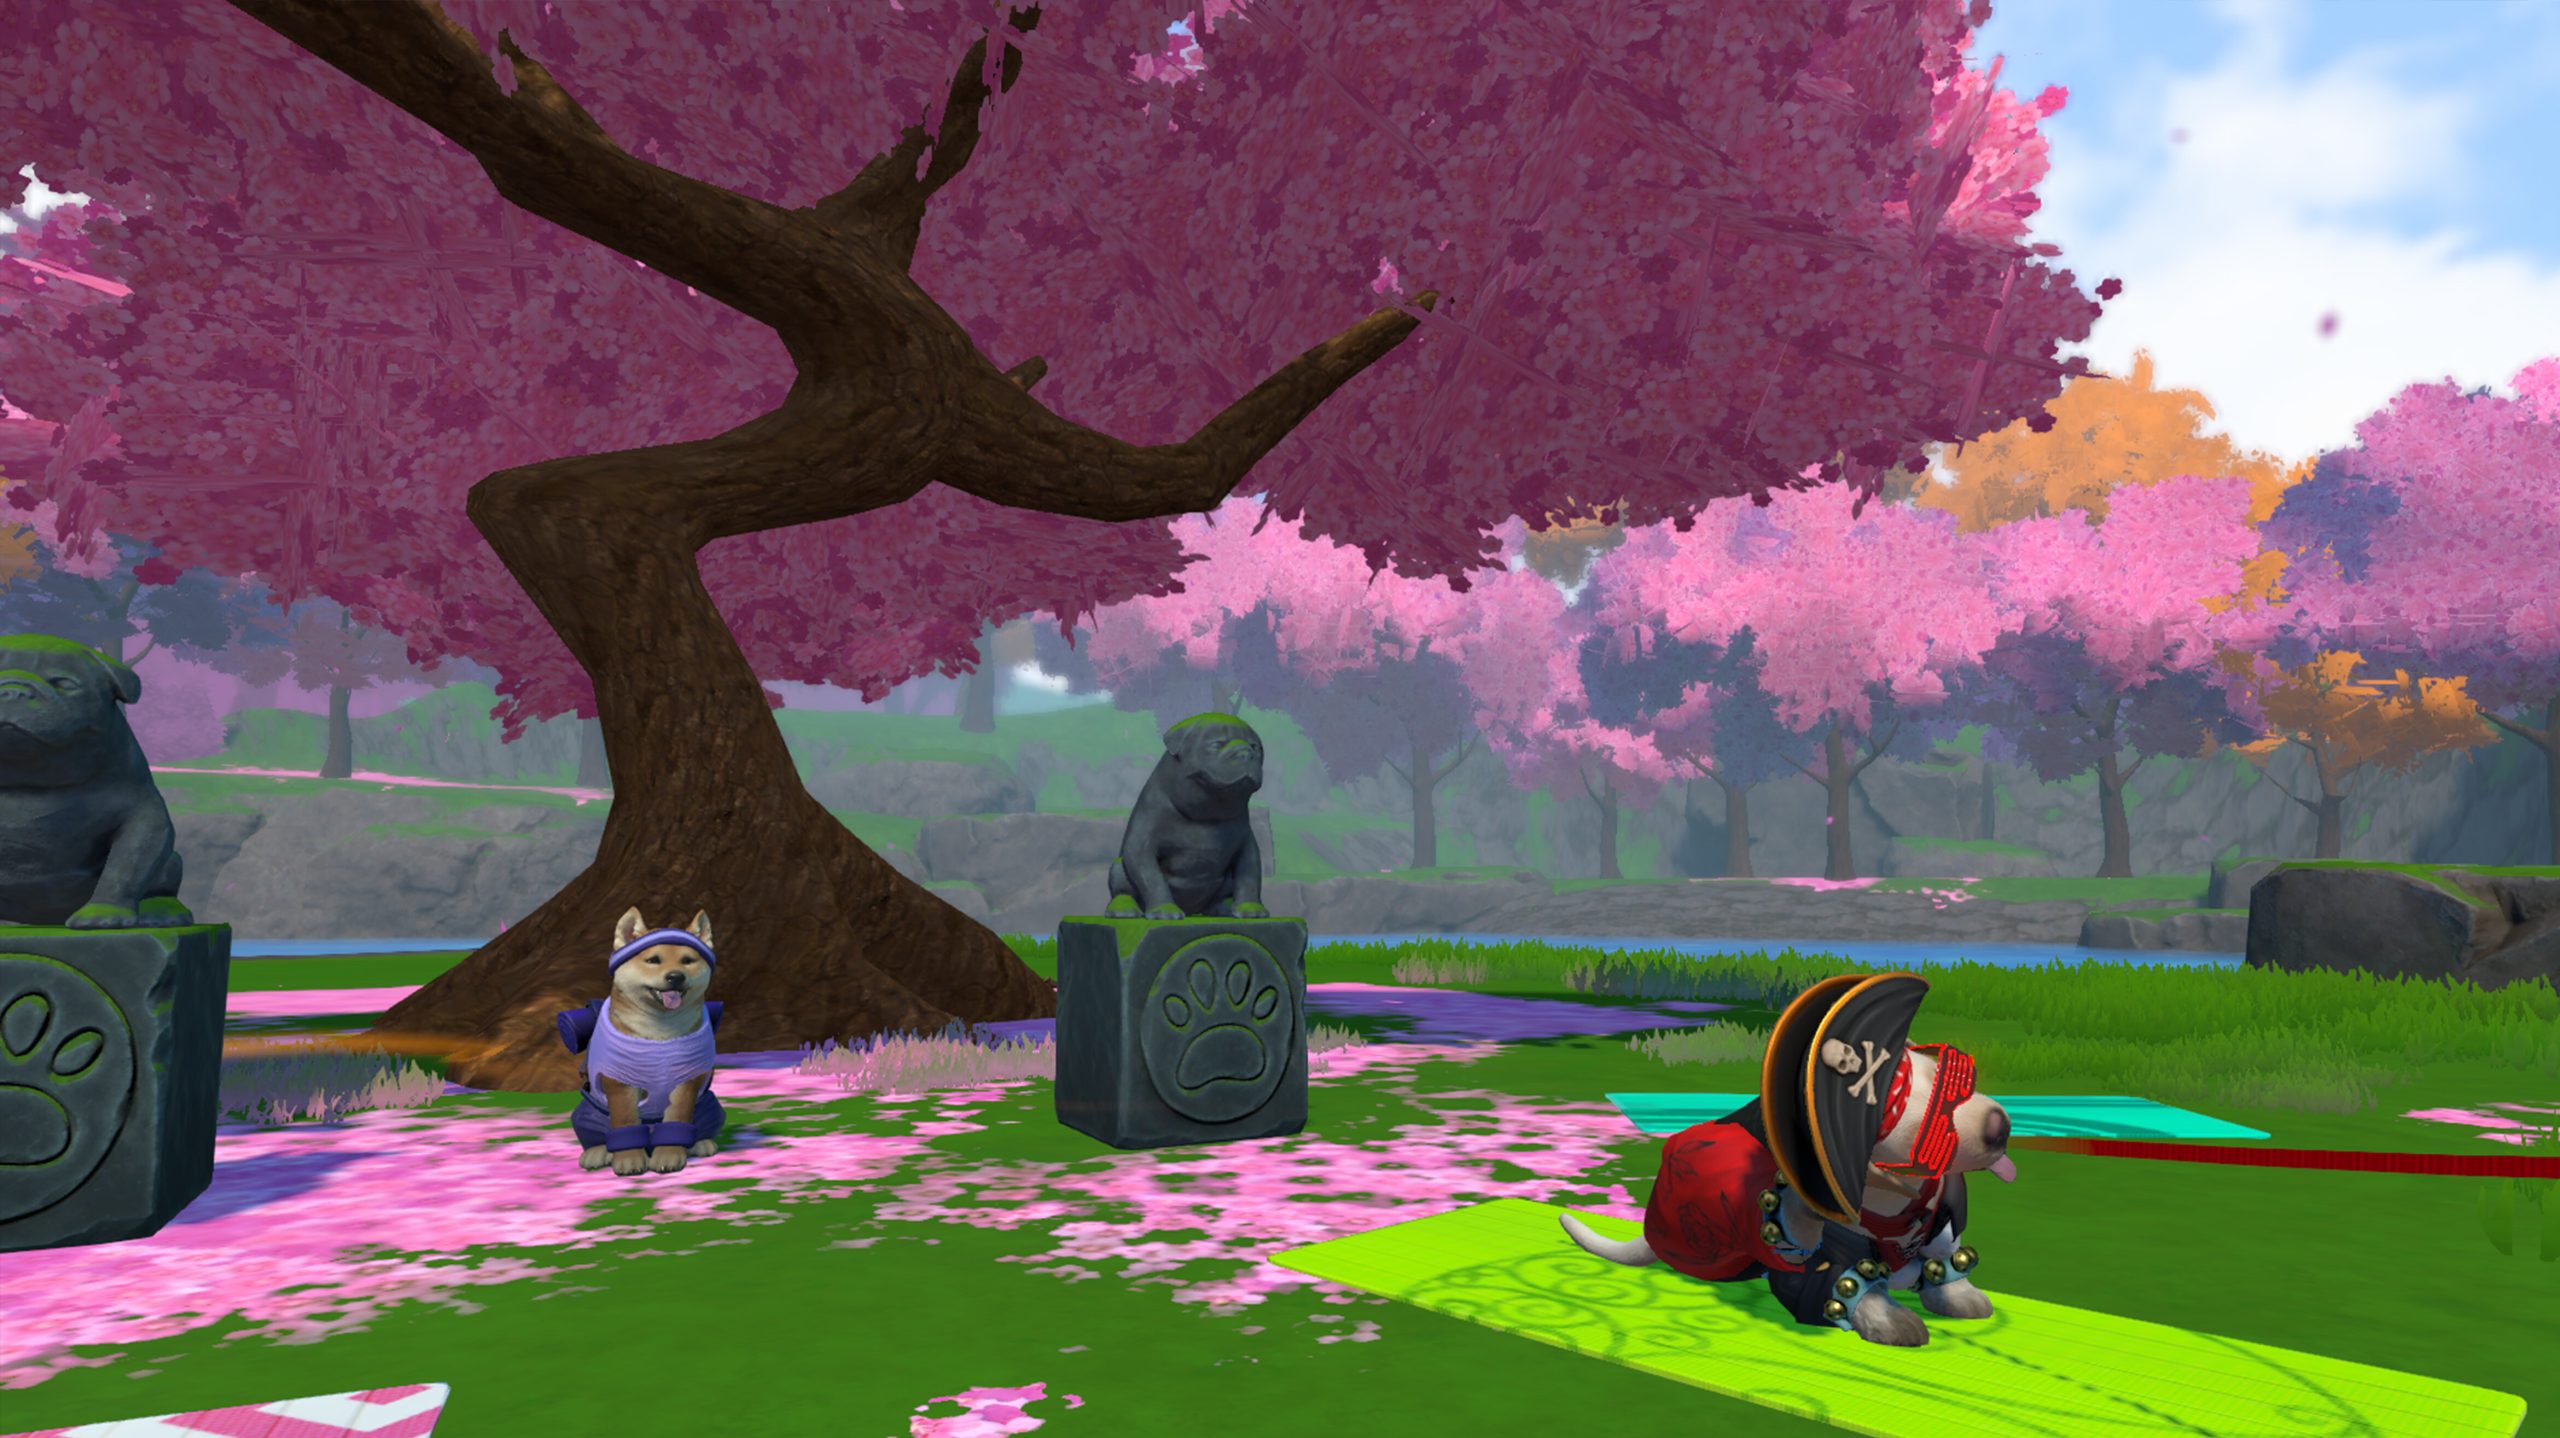 A screenshot from Little Friends: Puppy Island. Under a cherry blossom tree is a dog statue, and two dogs. One dog is dressed in workout gear, the other like a pirate.